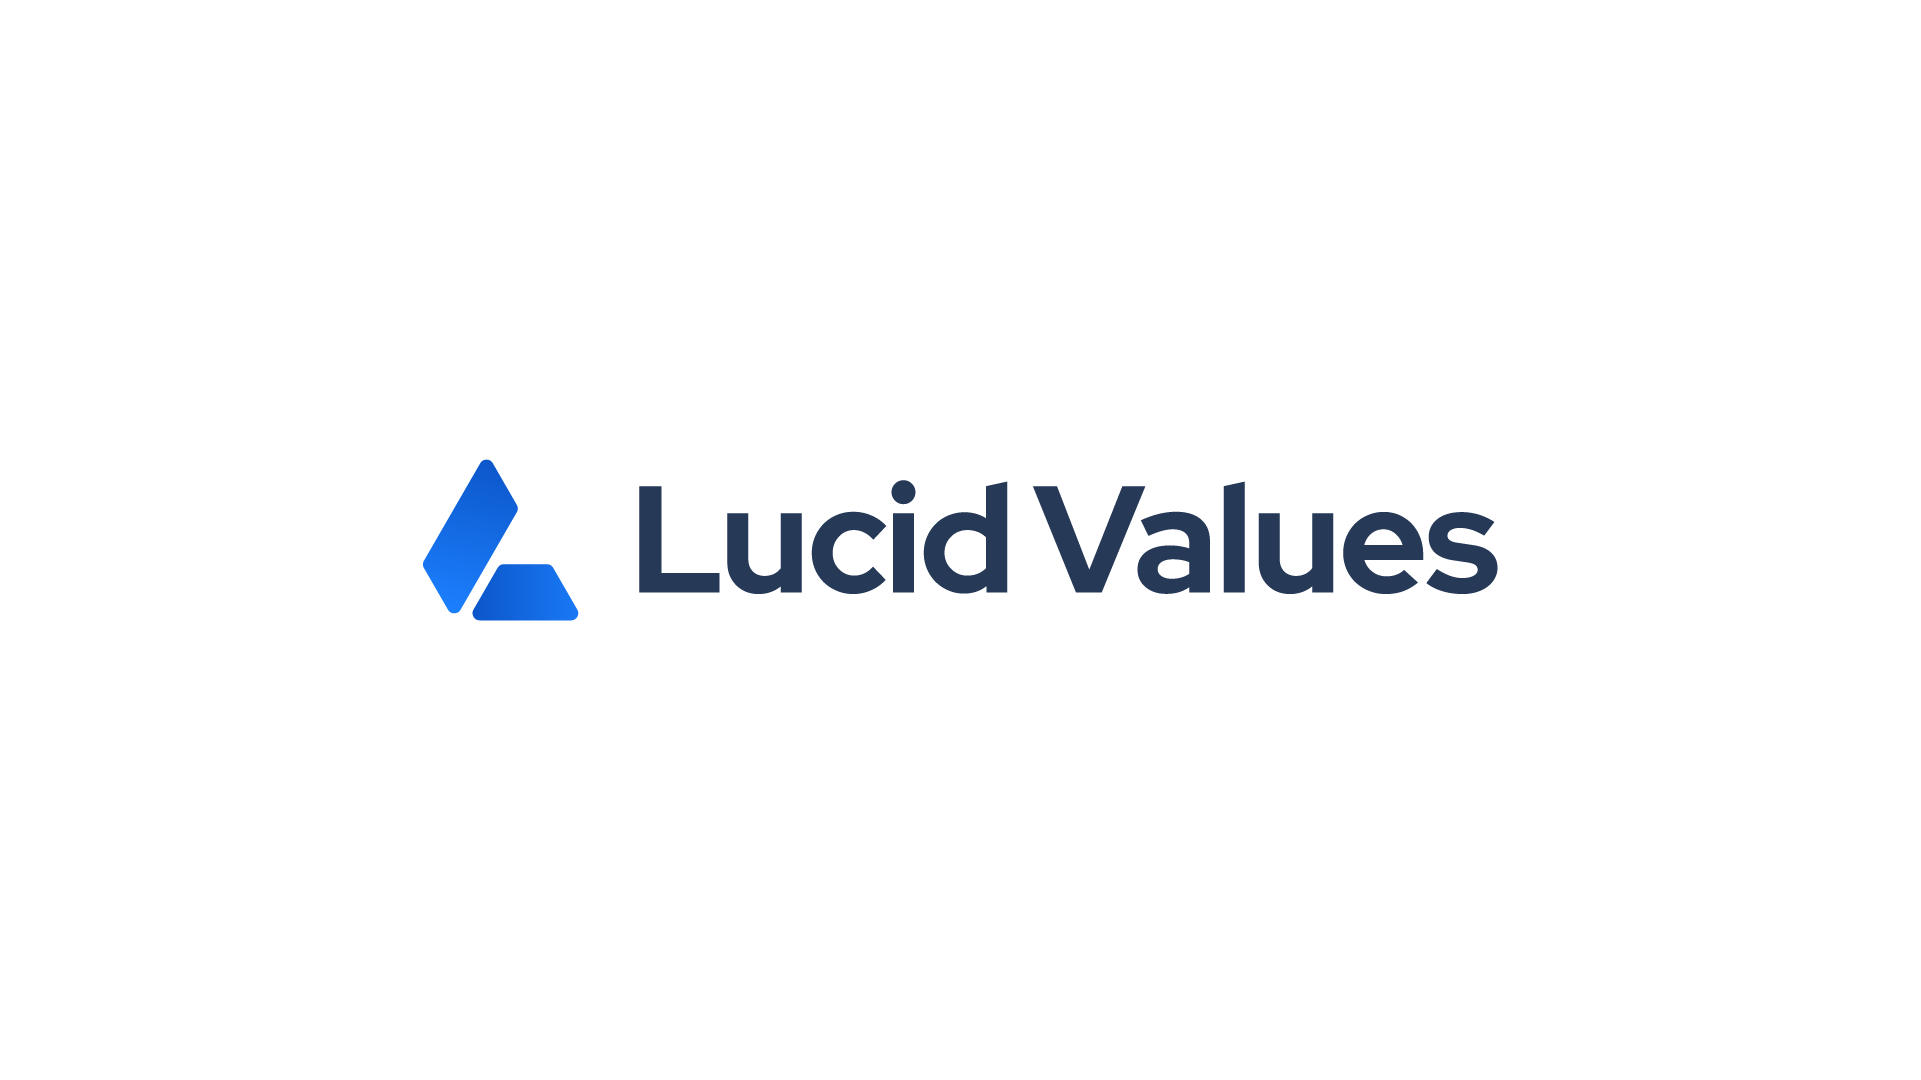 Lucid Values - Job Board Website logo, letters 'L' and 'V' combined in one shape, symbolizing clarity and strong values in job opportunities